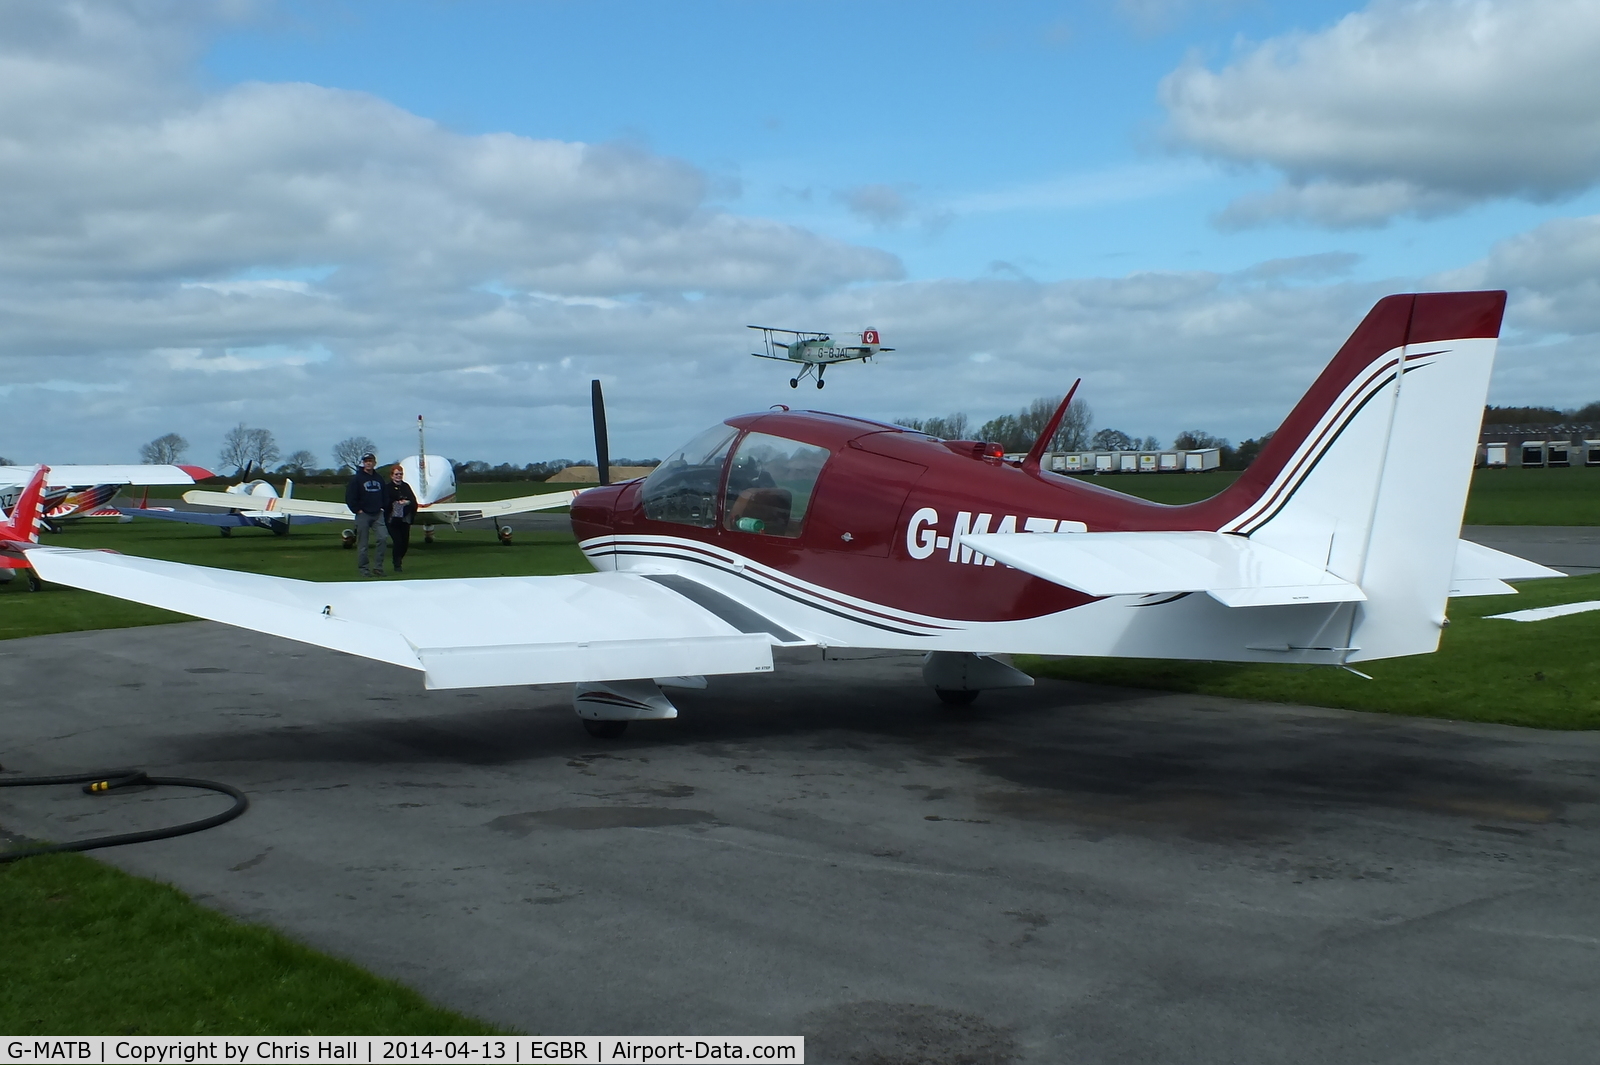 G-MATB, 1972 Robin DR-400-160 Chevalier C/N 735, at Breighton's 'Early Bird' Fly-in 13/04/14